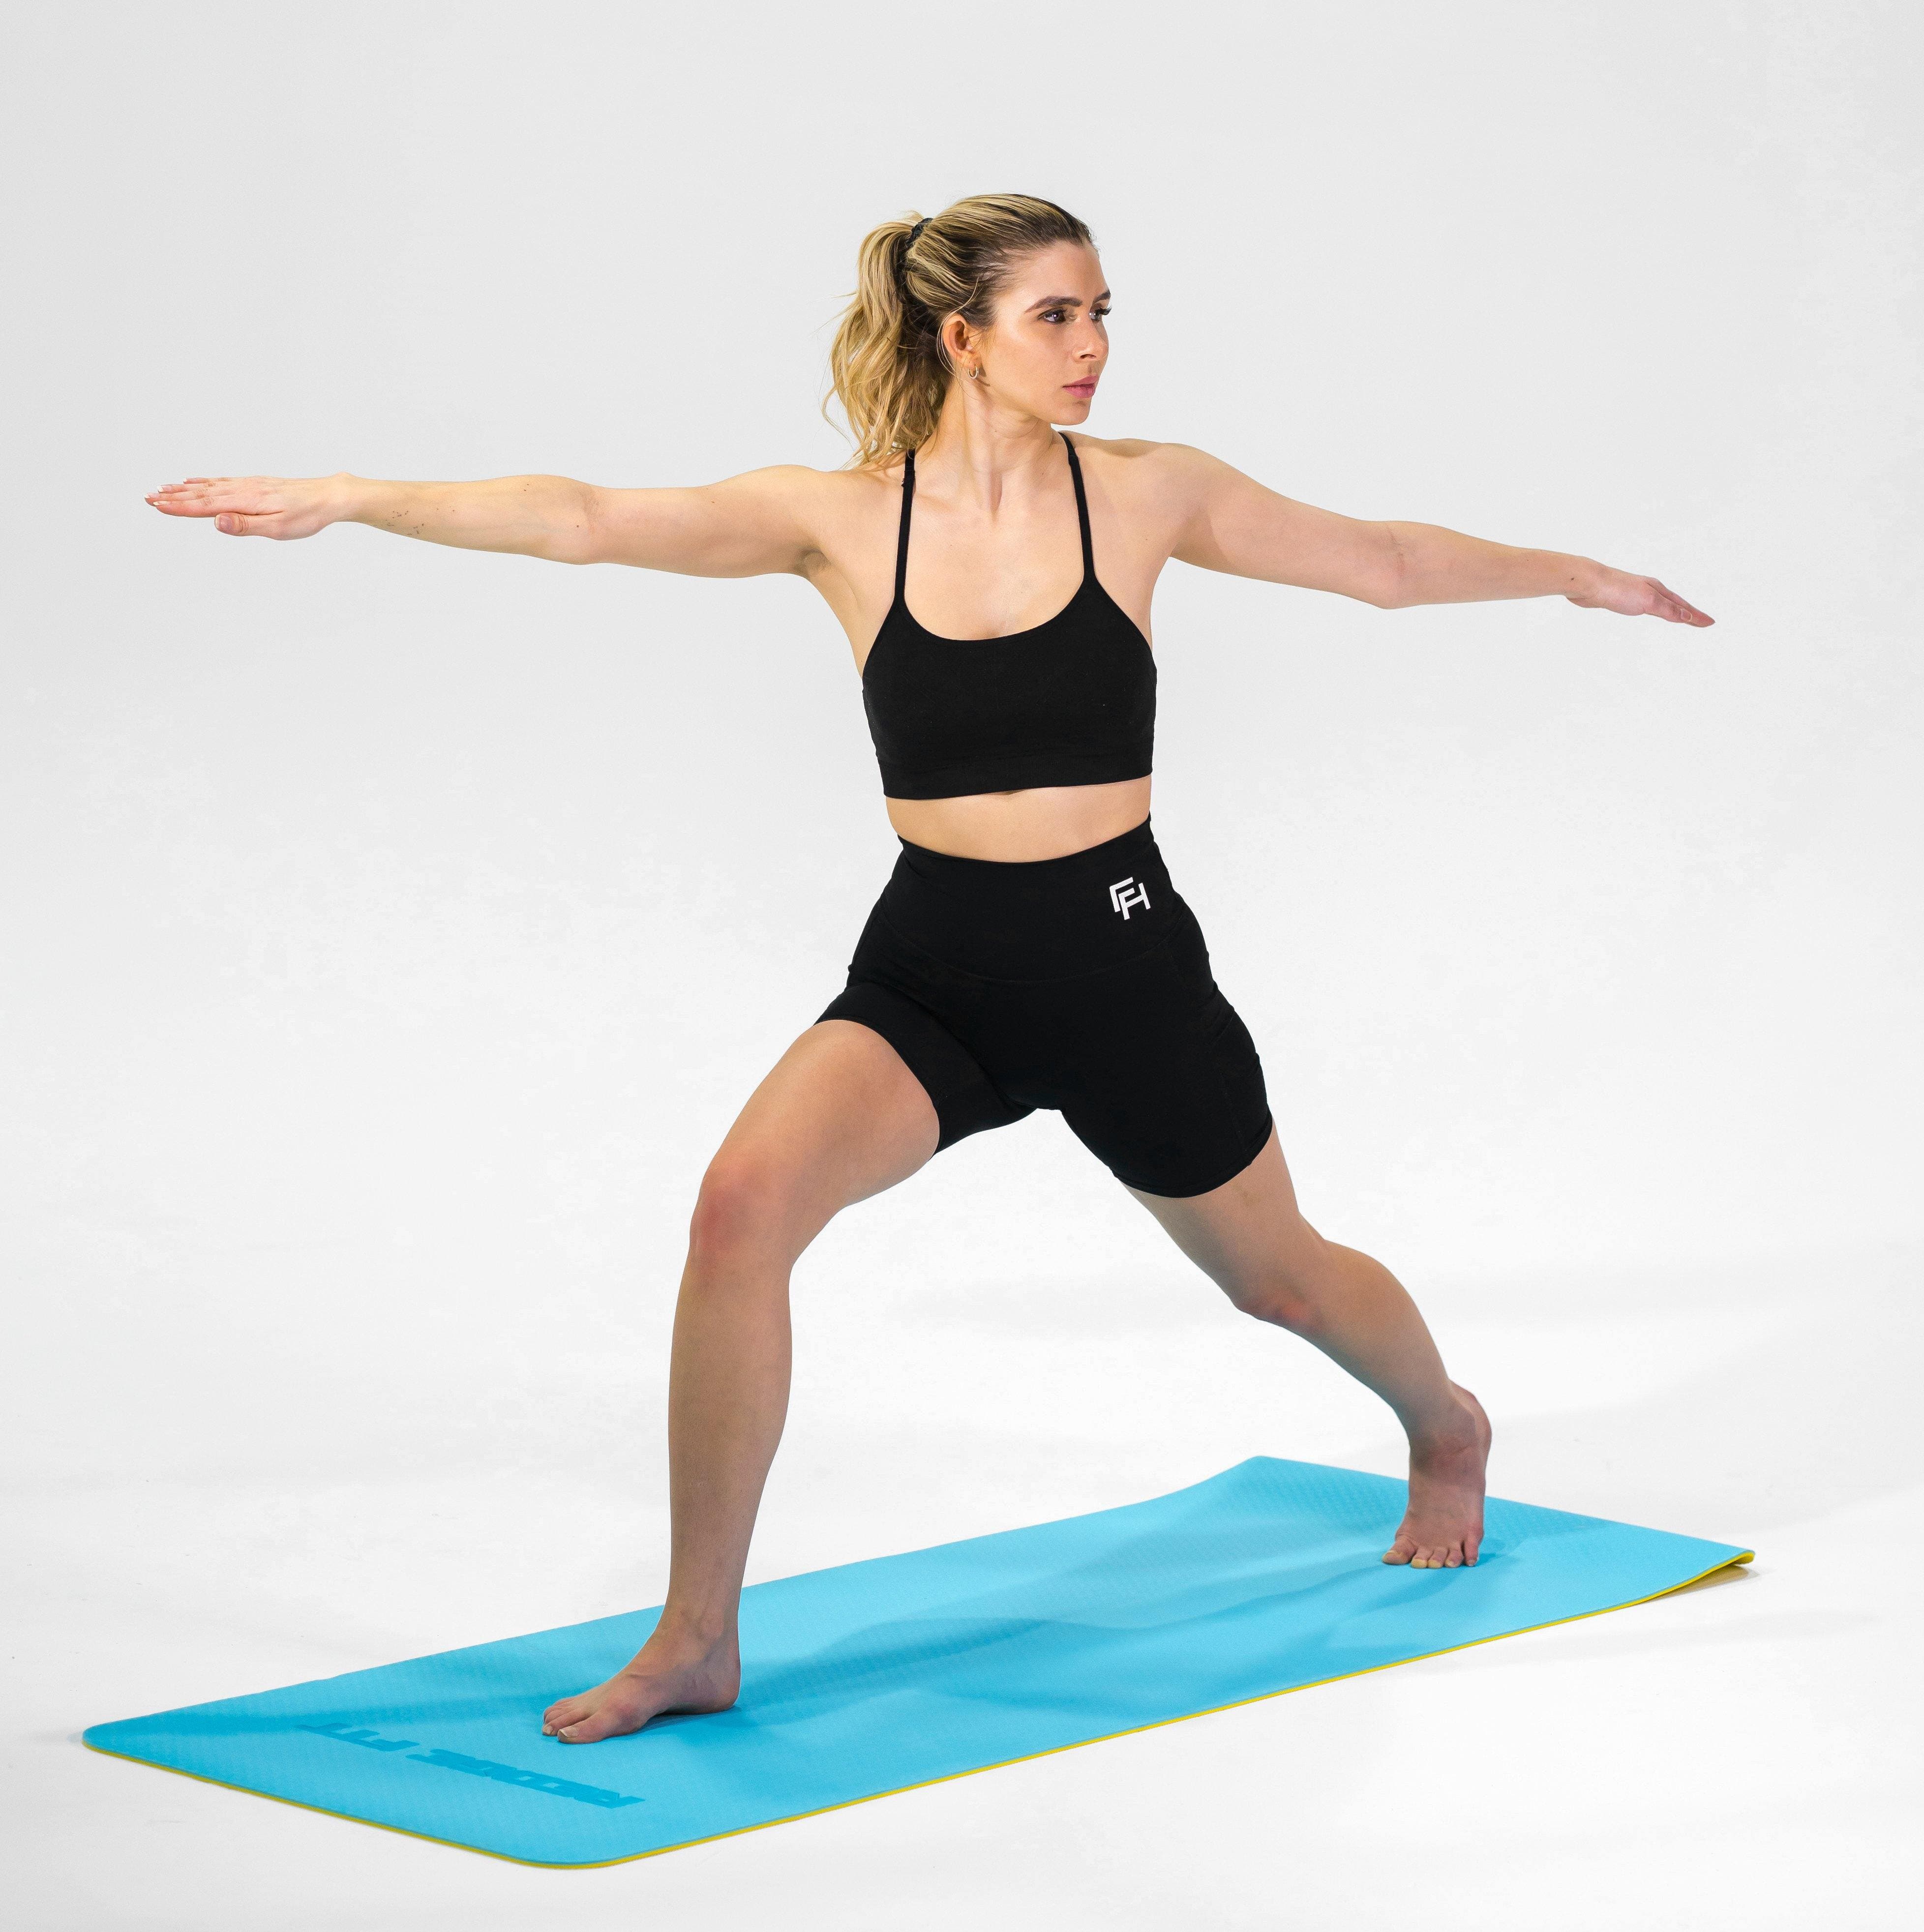 Woman modeling the Redge Fit Core Focus Starter Pack Yoga Mat Available at https://www.getredge.com/products/core-focus-all-in-one-pack-1